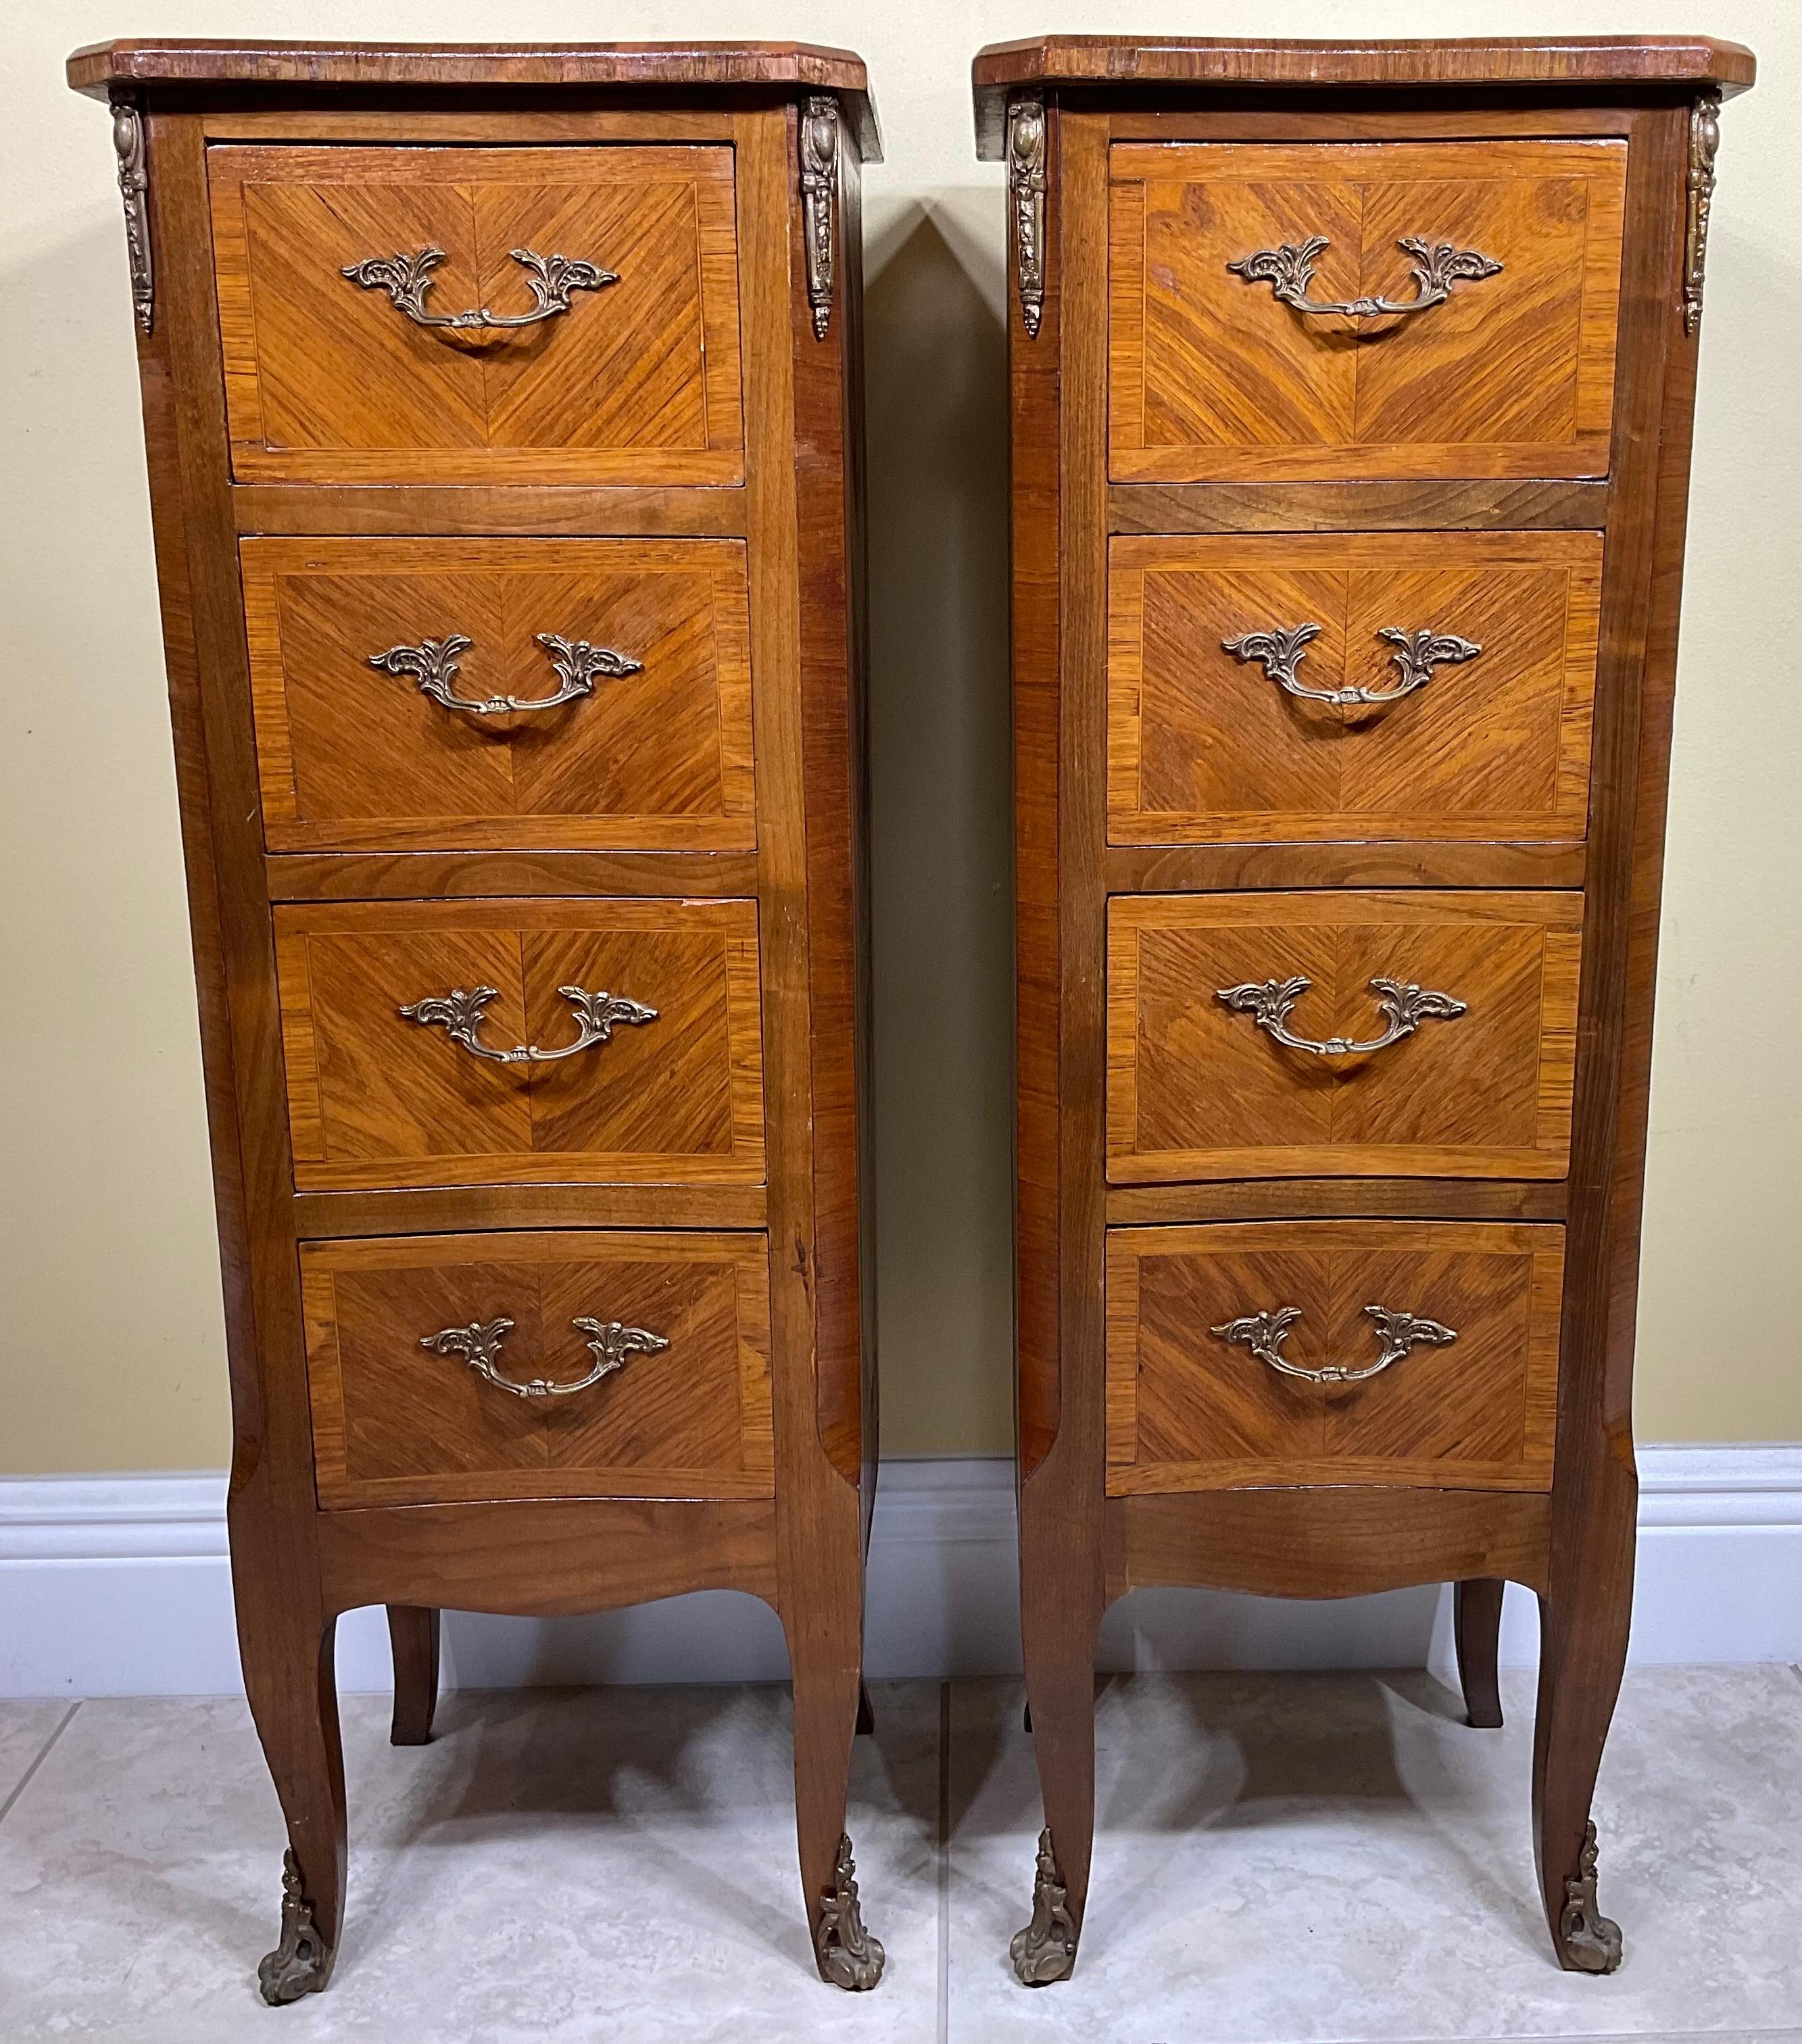 Fine quality Italian pair of side table or nightstands in inlay wood. On the front there are four functional drawers. Good condition lightly restored Wood veneer.

      